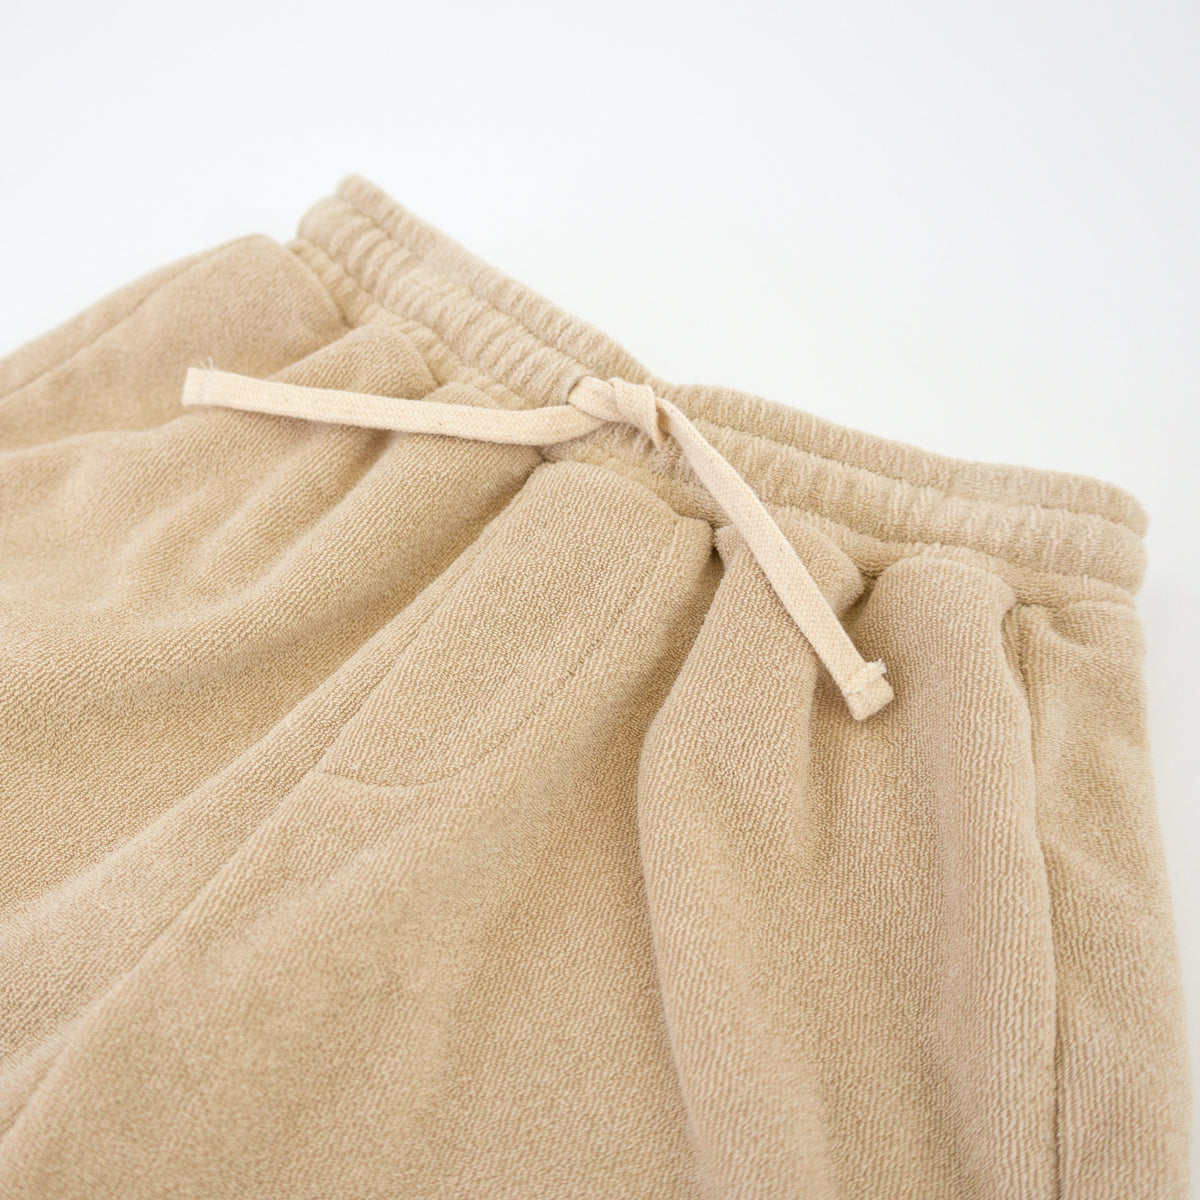 oh baby! Cotton Terry Boys Track Shorts - Sand